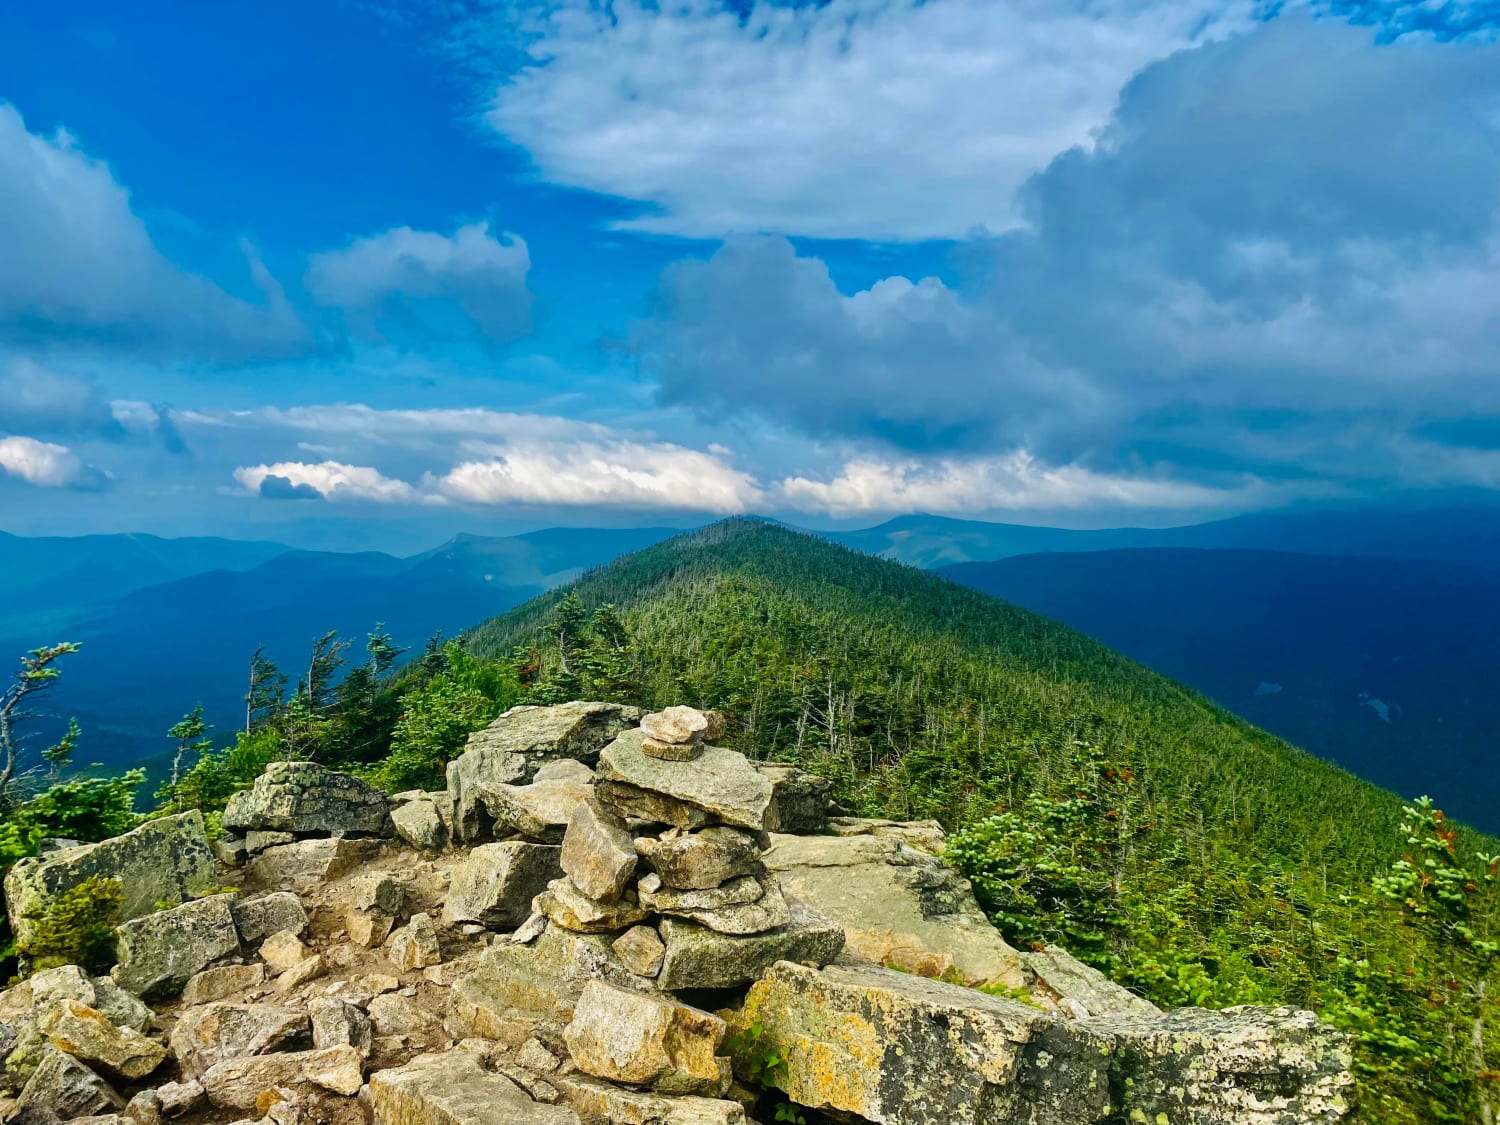 West Bond and The Pemigewasset Wilderness, White Mountains National Forest, New Hampshire